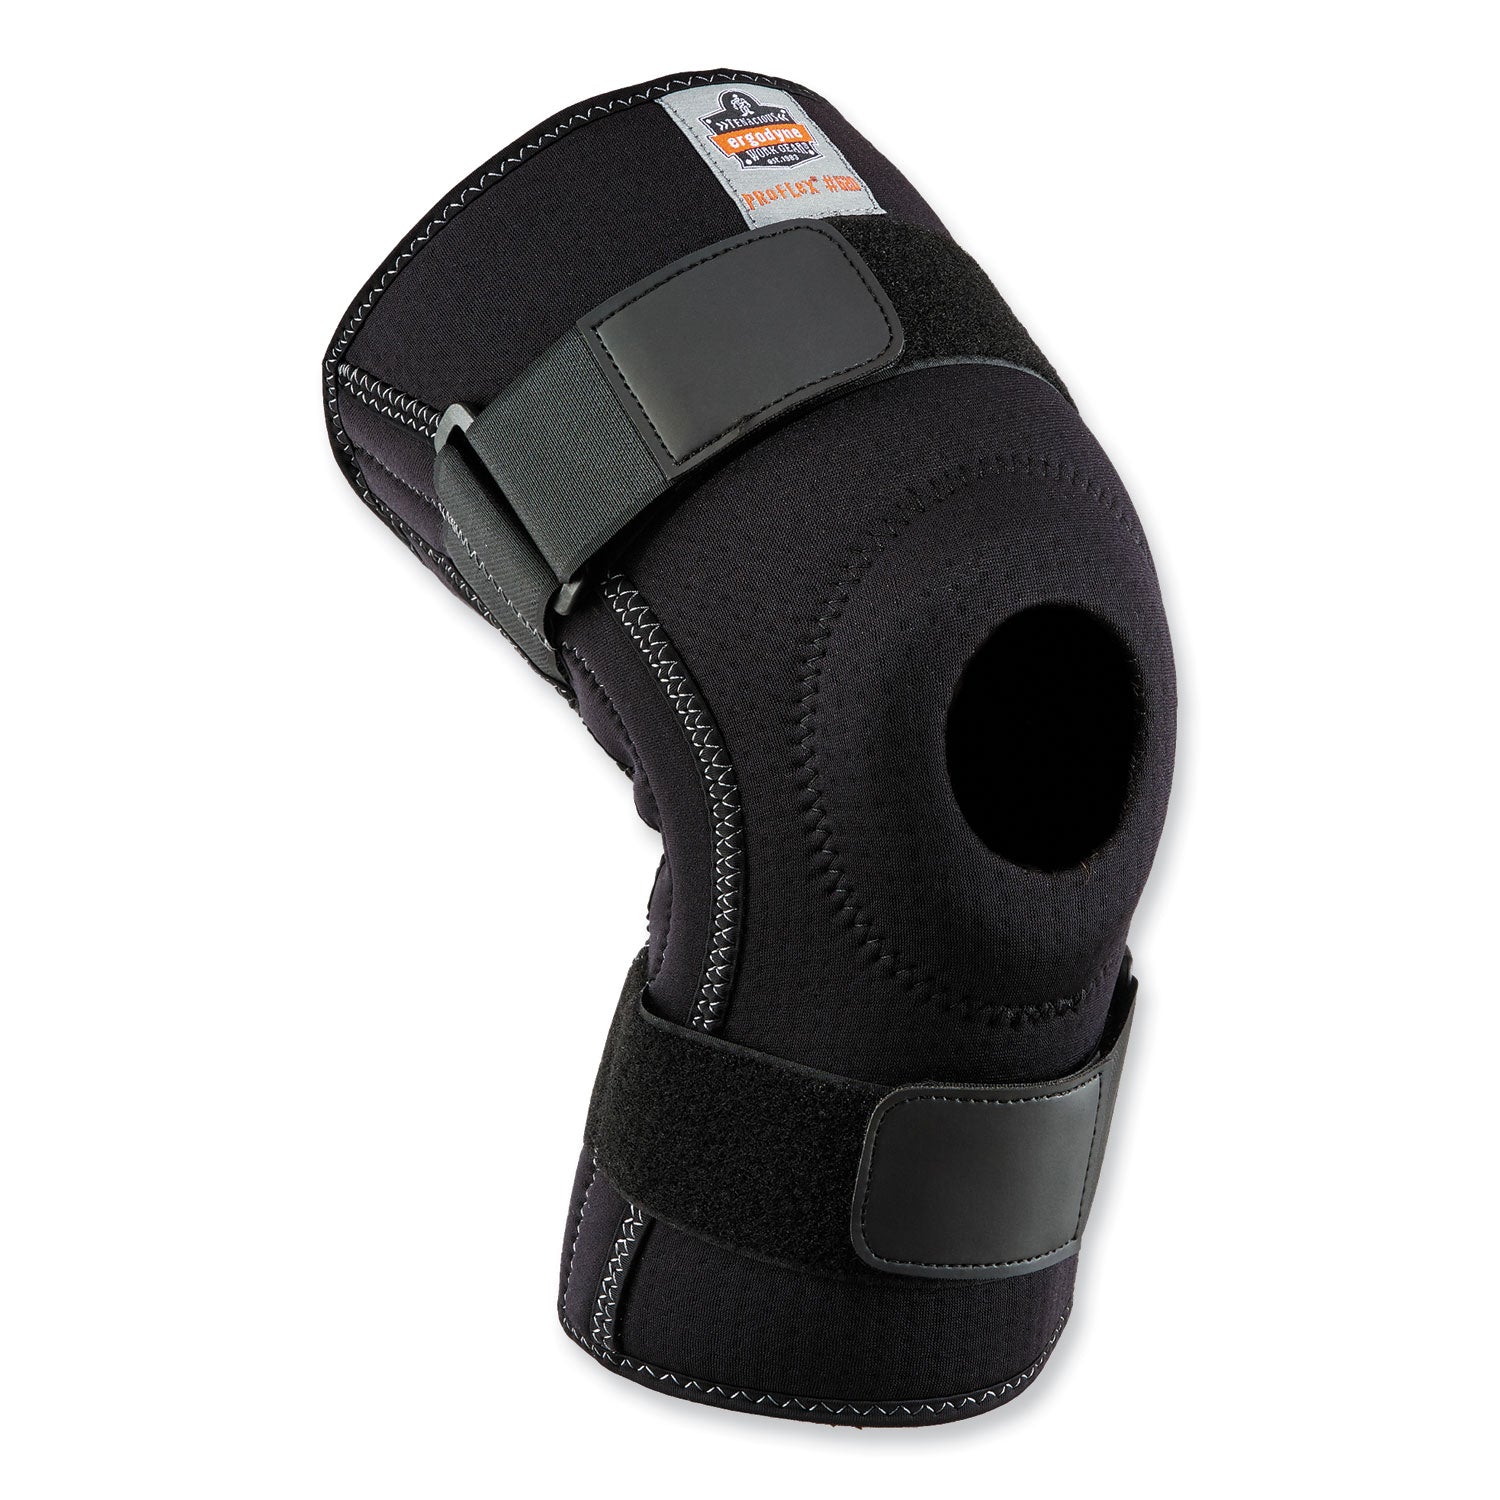 proflex-620-open-patella-spiral-stays-knee-sleeve-x-large-black-ships-in-1-3-business-days_ego16545 - 1